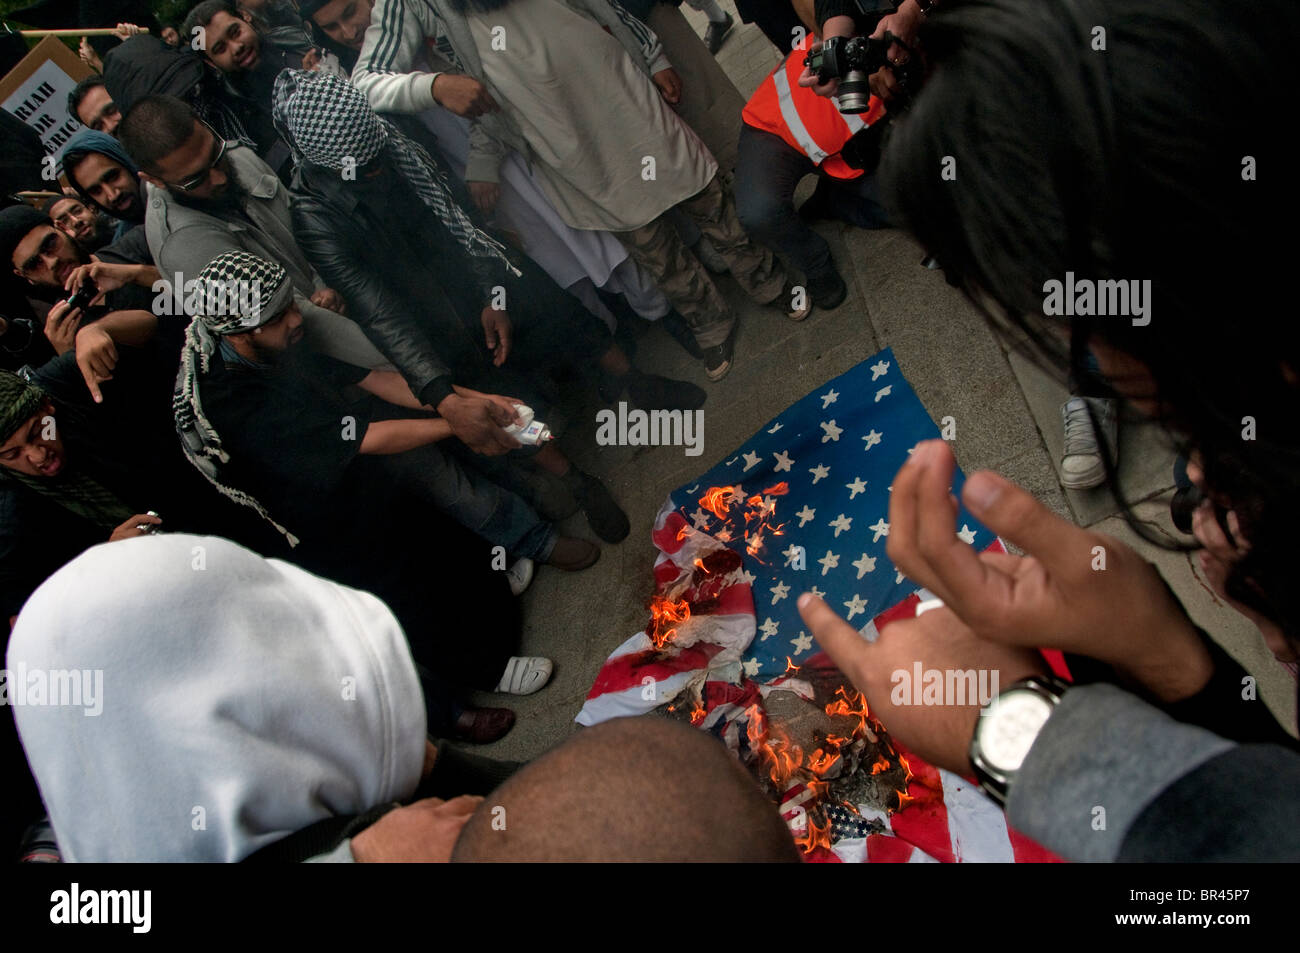 An extremist group 'Muslims Against the Crusades',led by Anjem Choudary burn the American flag protesting outside the US Embassy Stock Photo